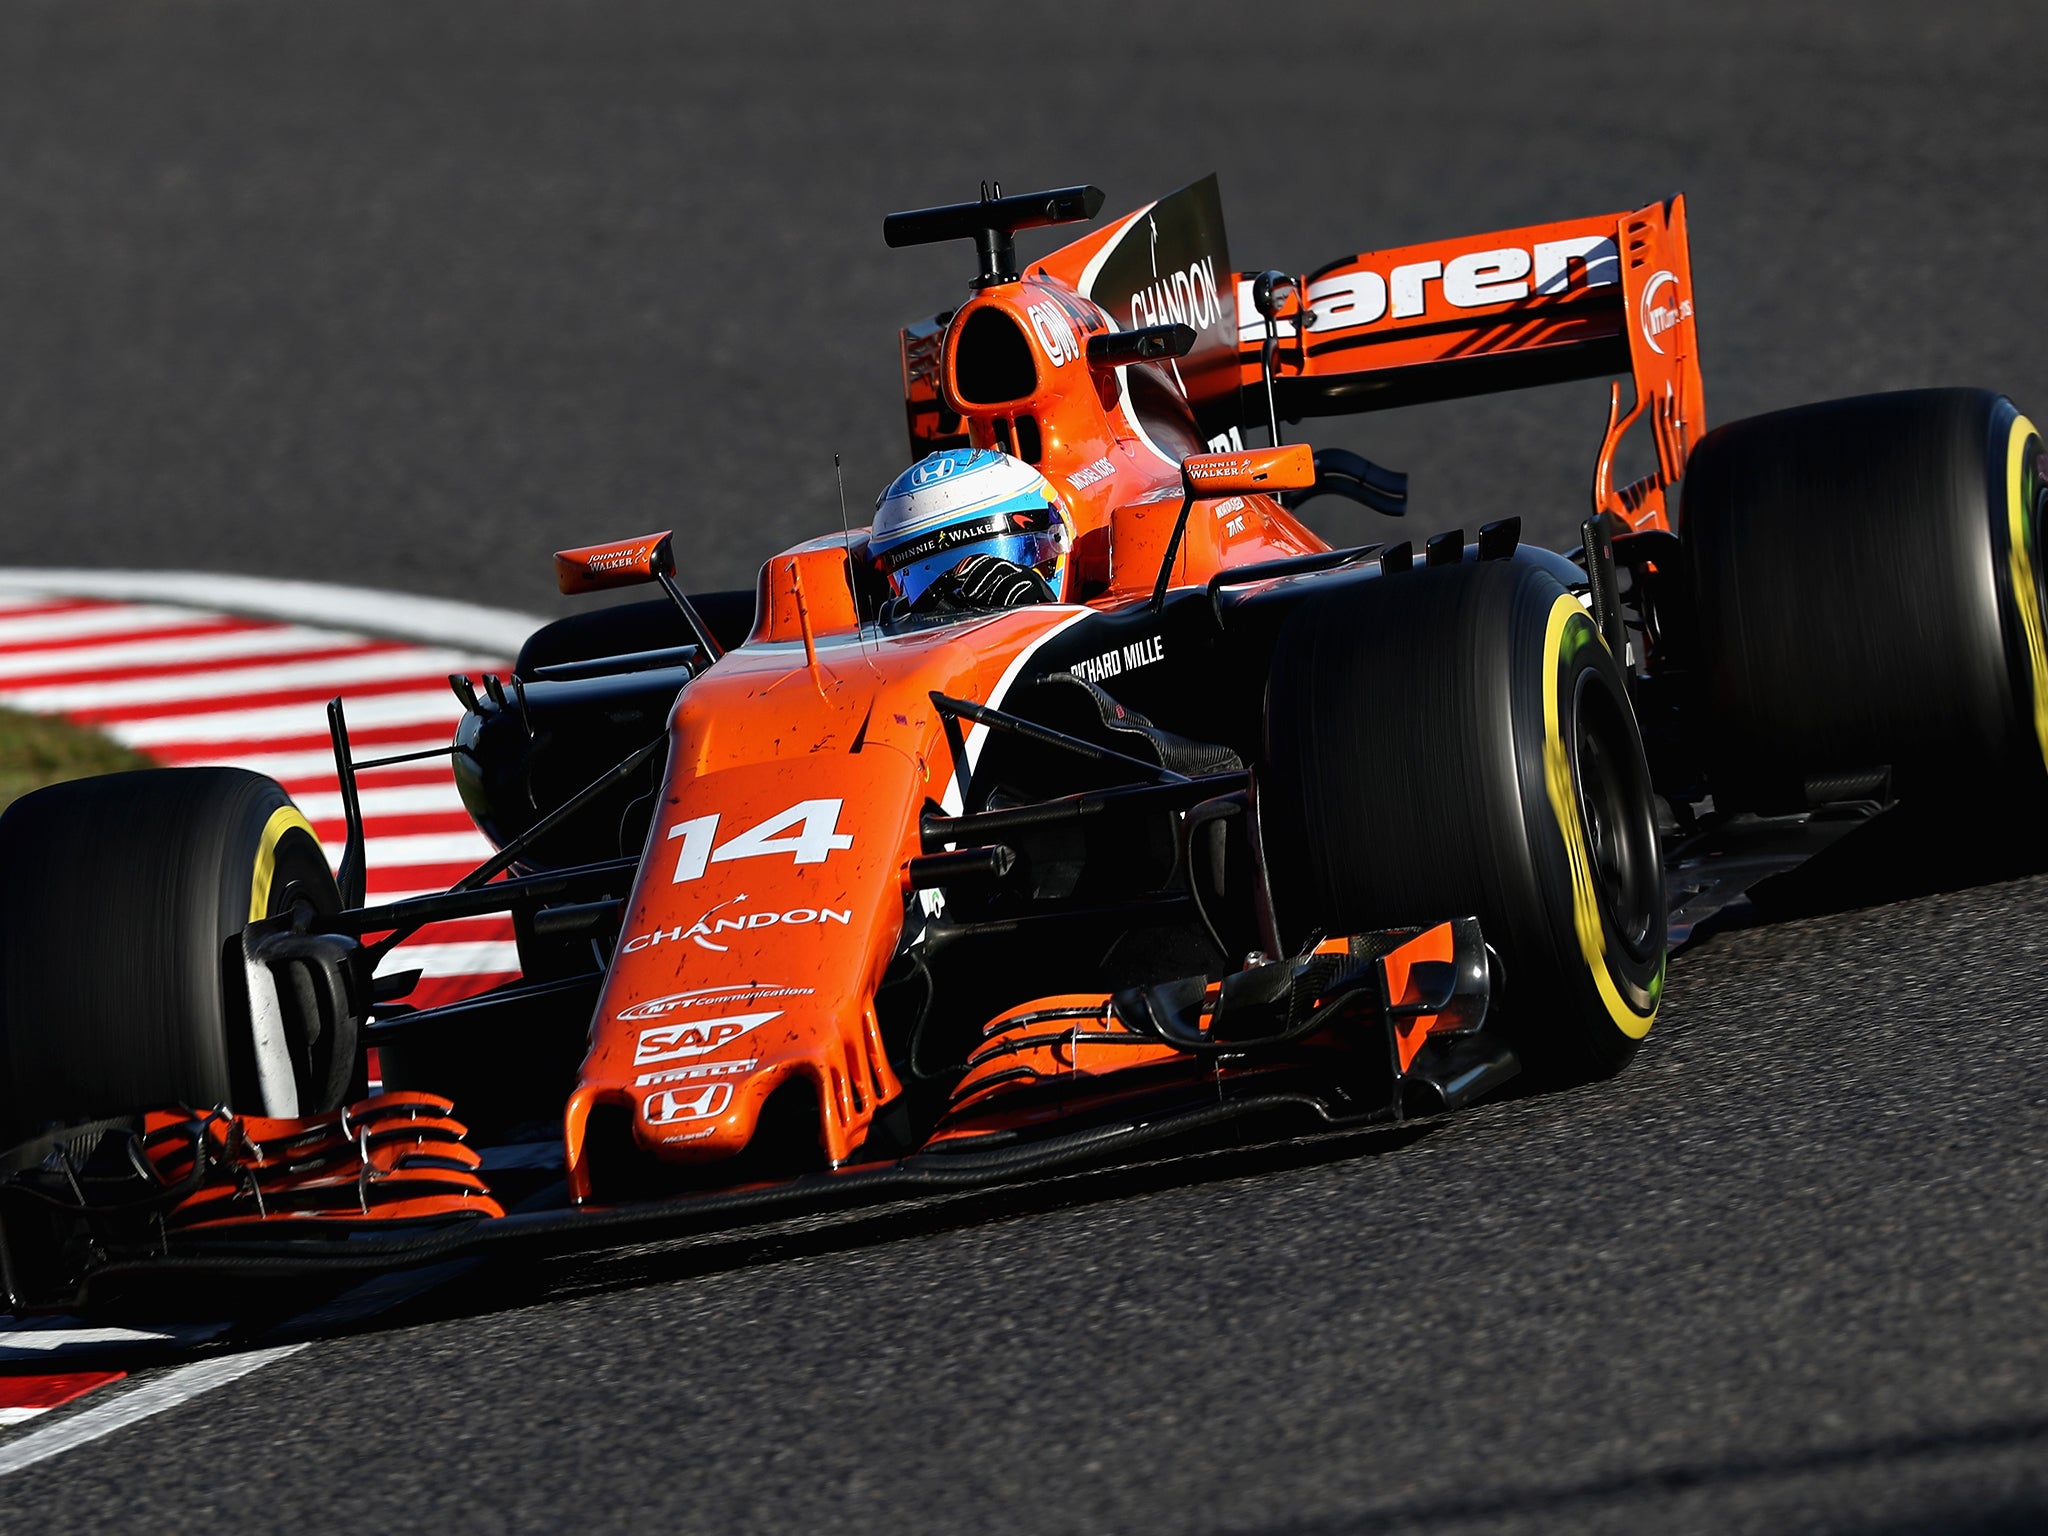 Alonso waited until McLaren signed a deal with Renault before committing his future